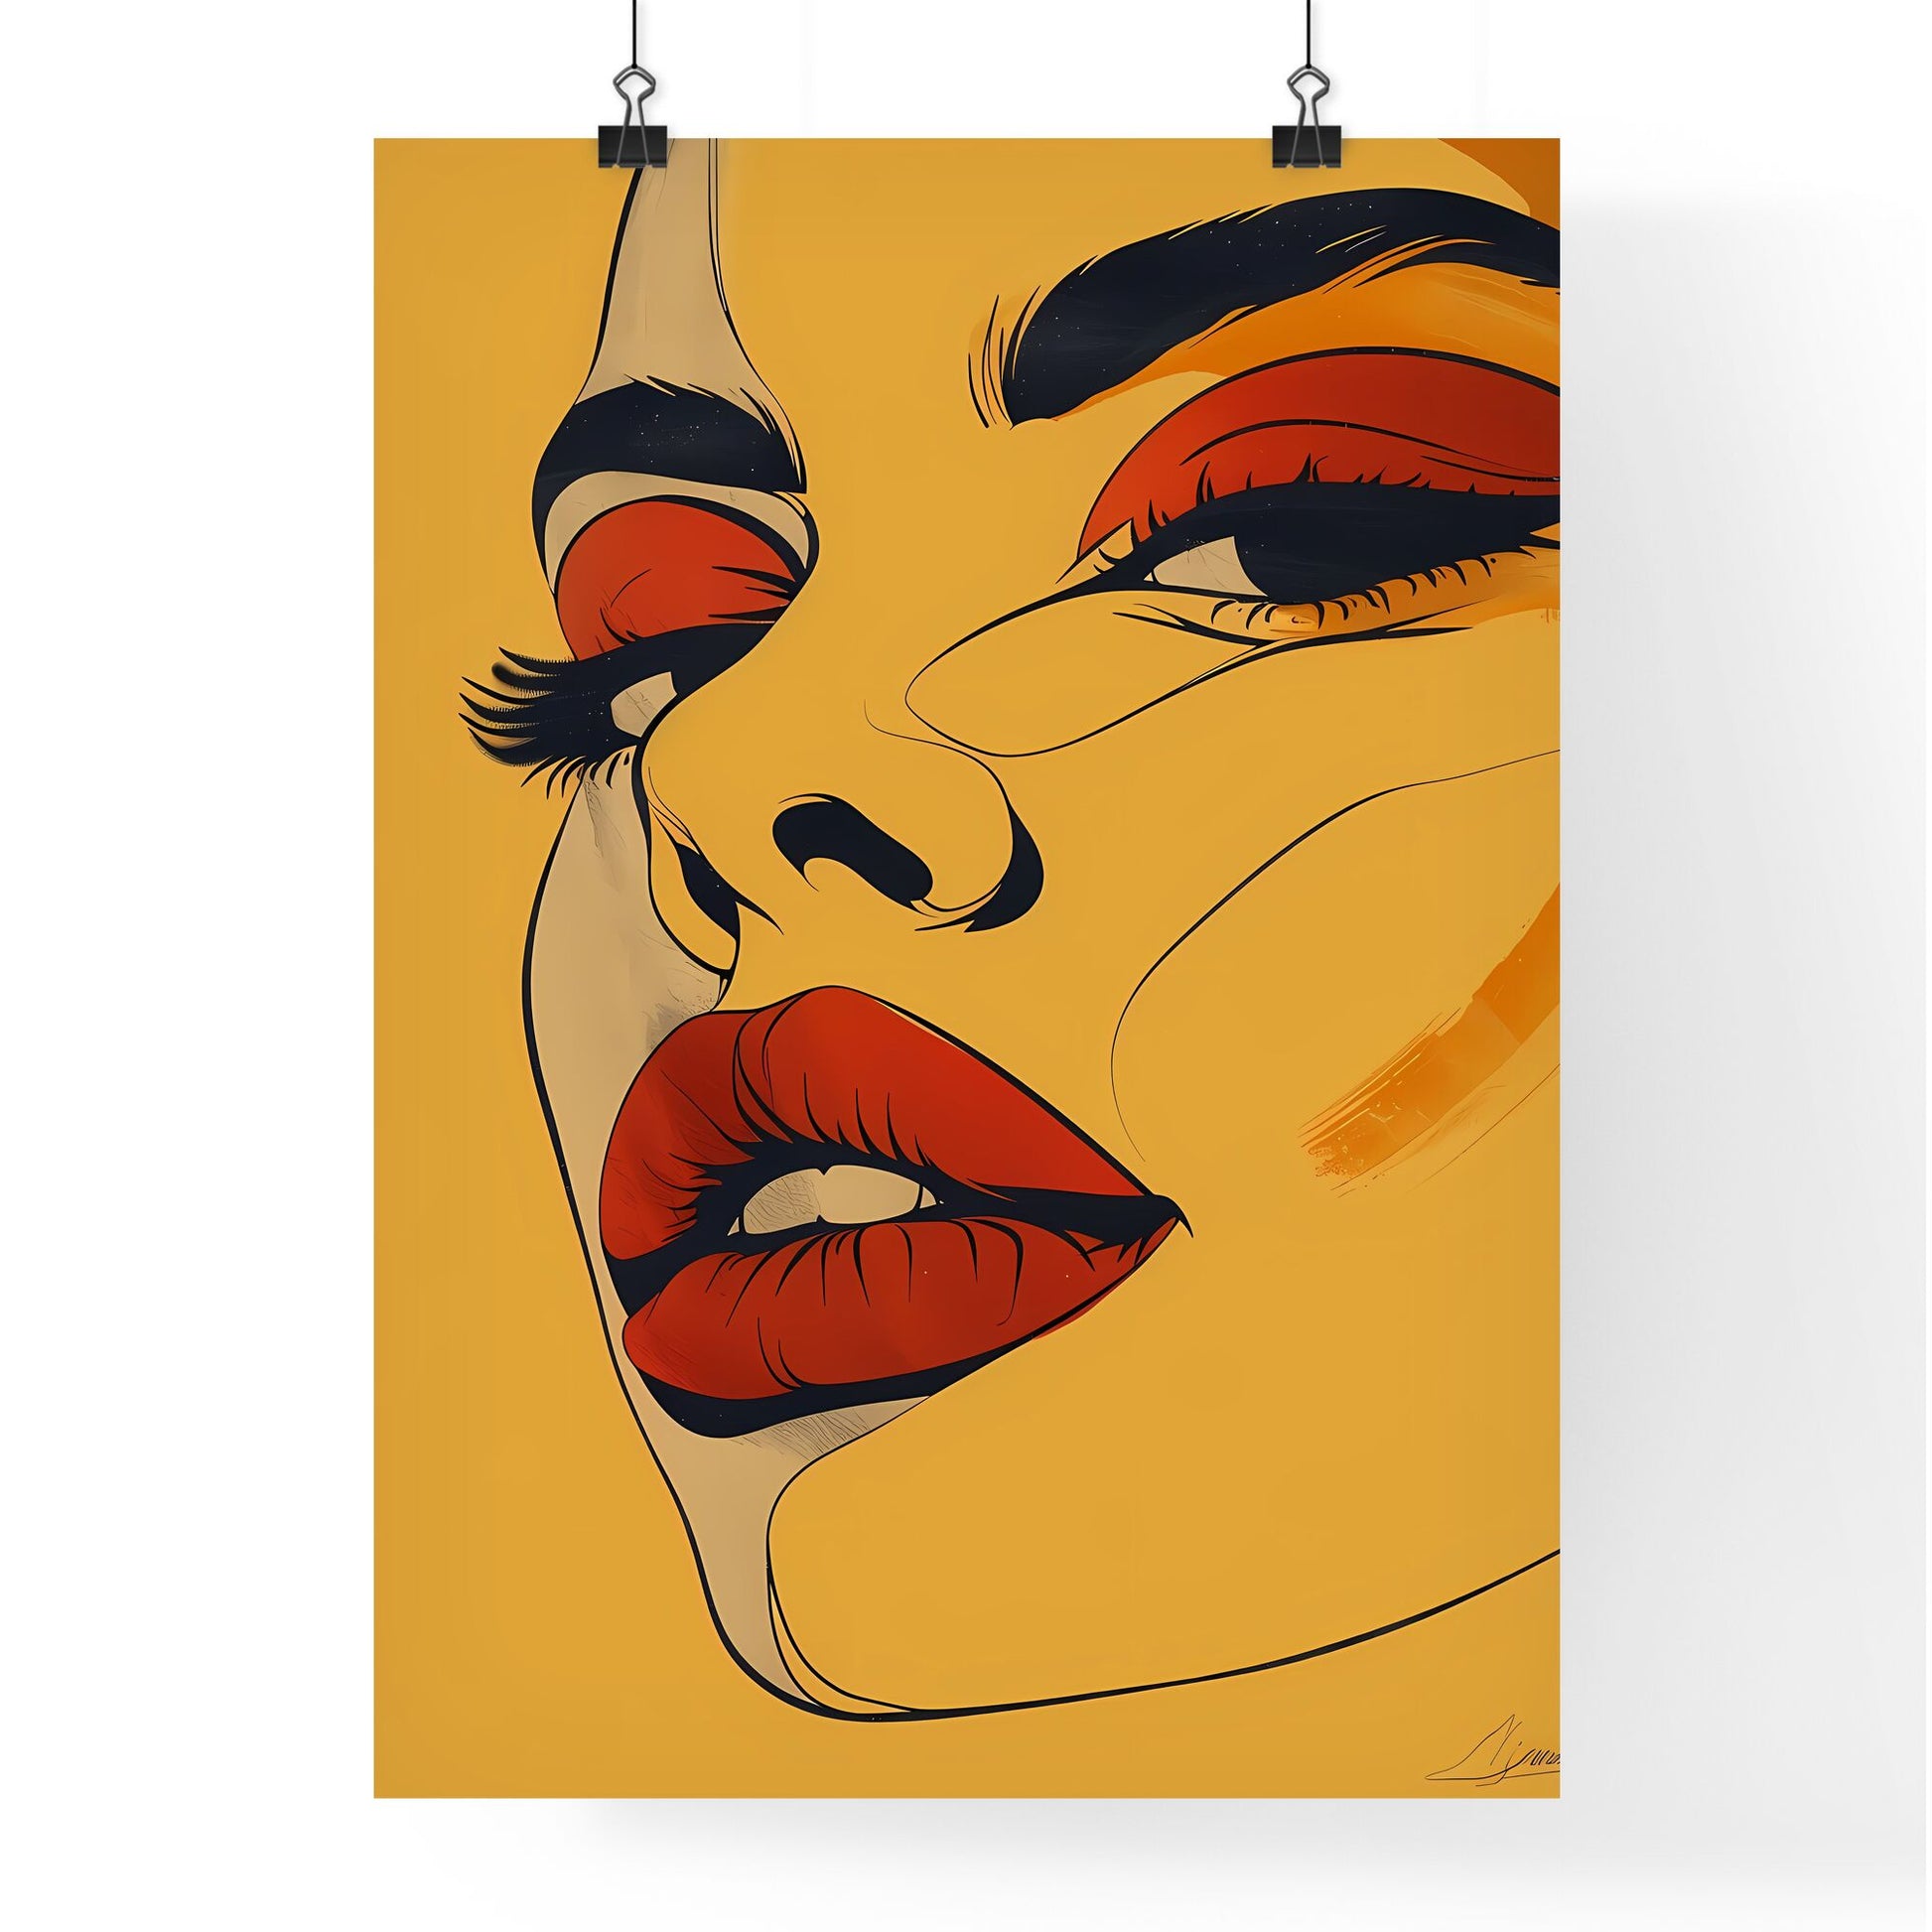 Abstract Travel Artwork: AliciA - A Modern, Vibrant, and Simplistic Poster Depicting a Womans Face Crafted with Alphabet Shapes and Bright Matte Colors. Default Title